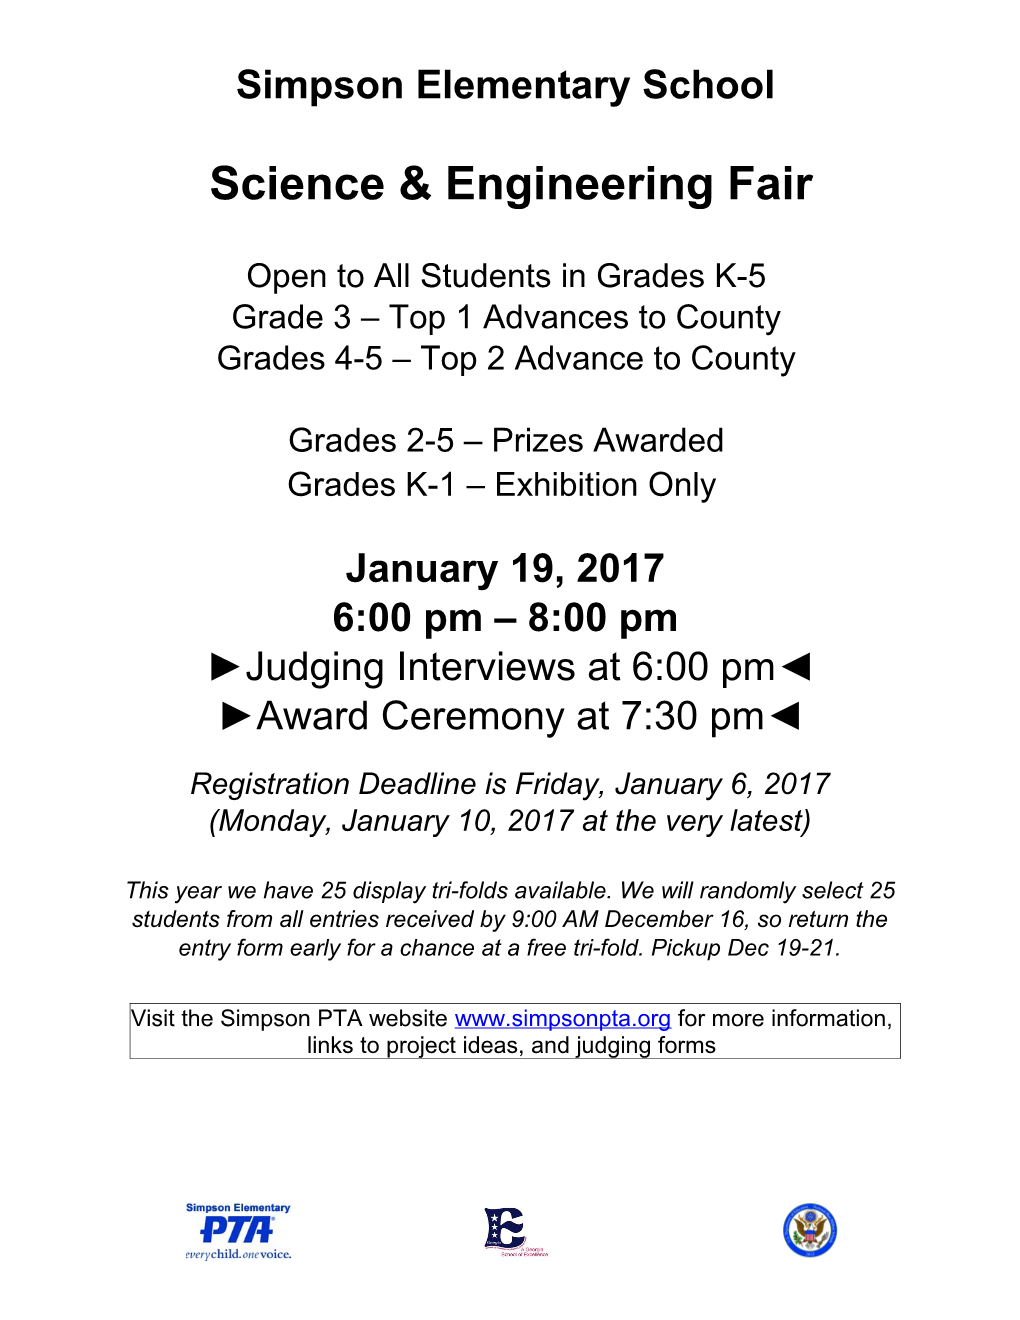 2015 Science Fair Notice and Entry Form